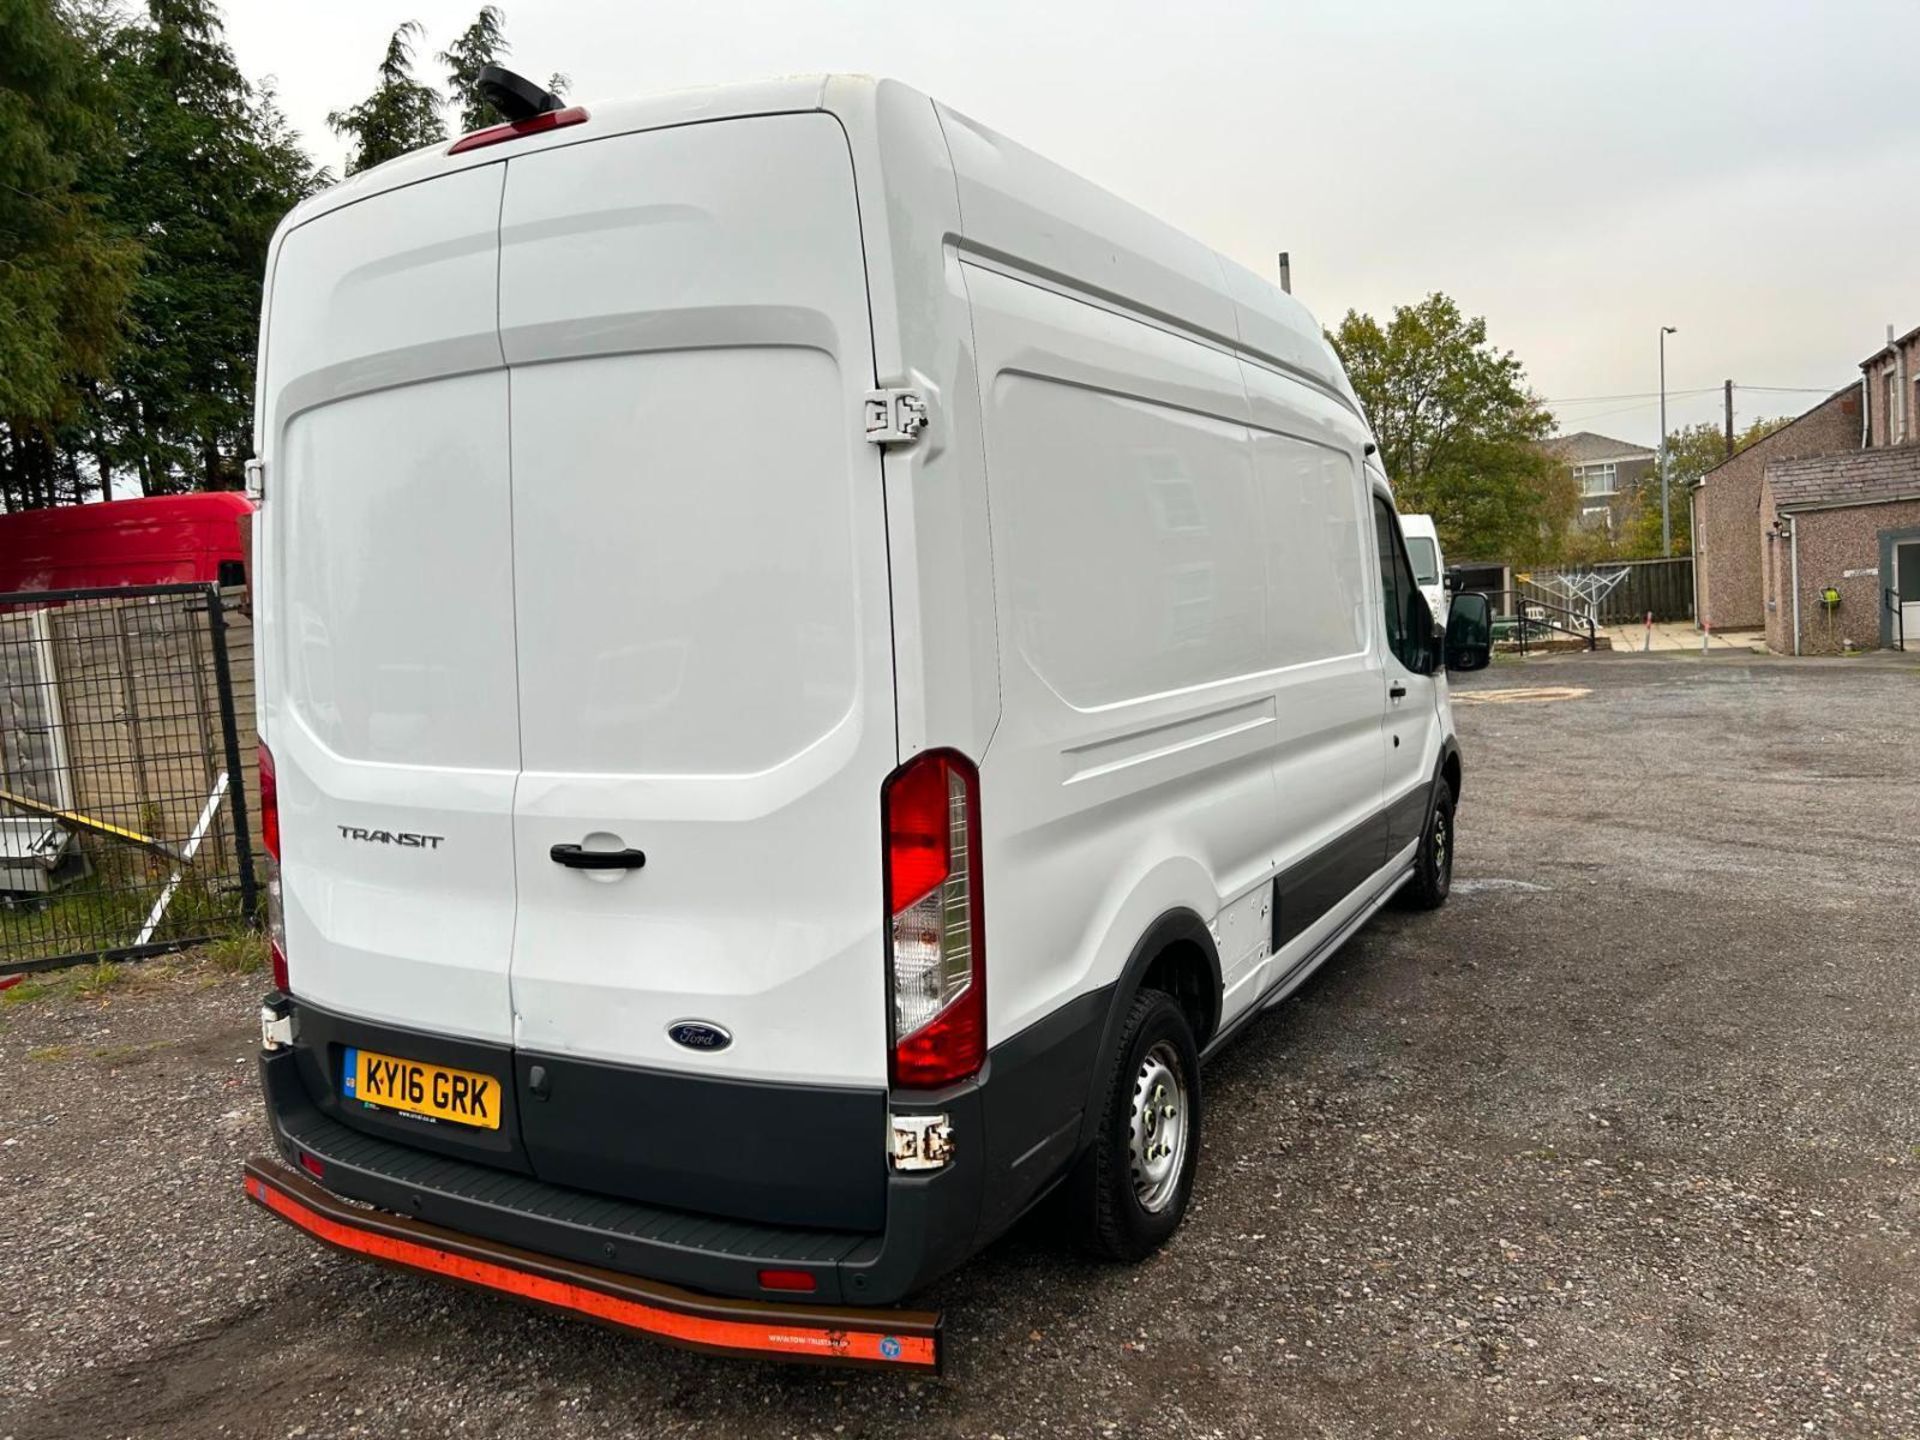 RELIABLE WORKHORSE: 2016 FORD TRANSIT 2.2 TDCI L3 H3 PANEL VAN - Image 6 of 12